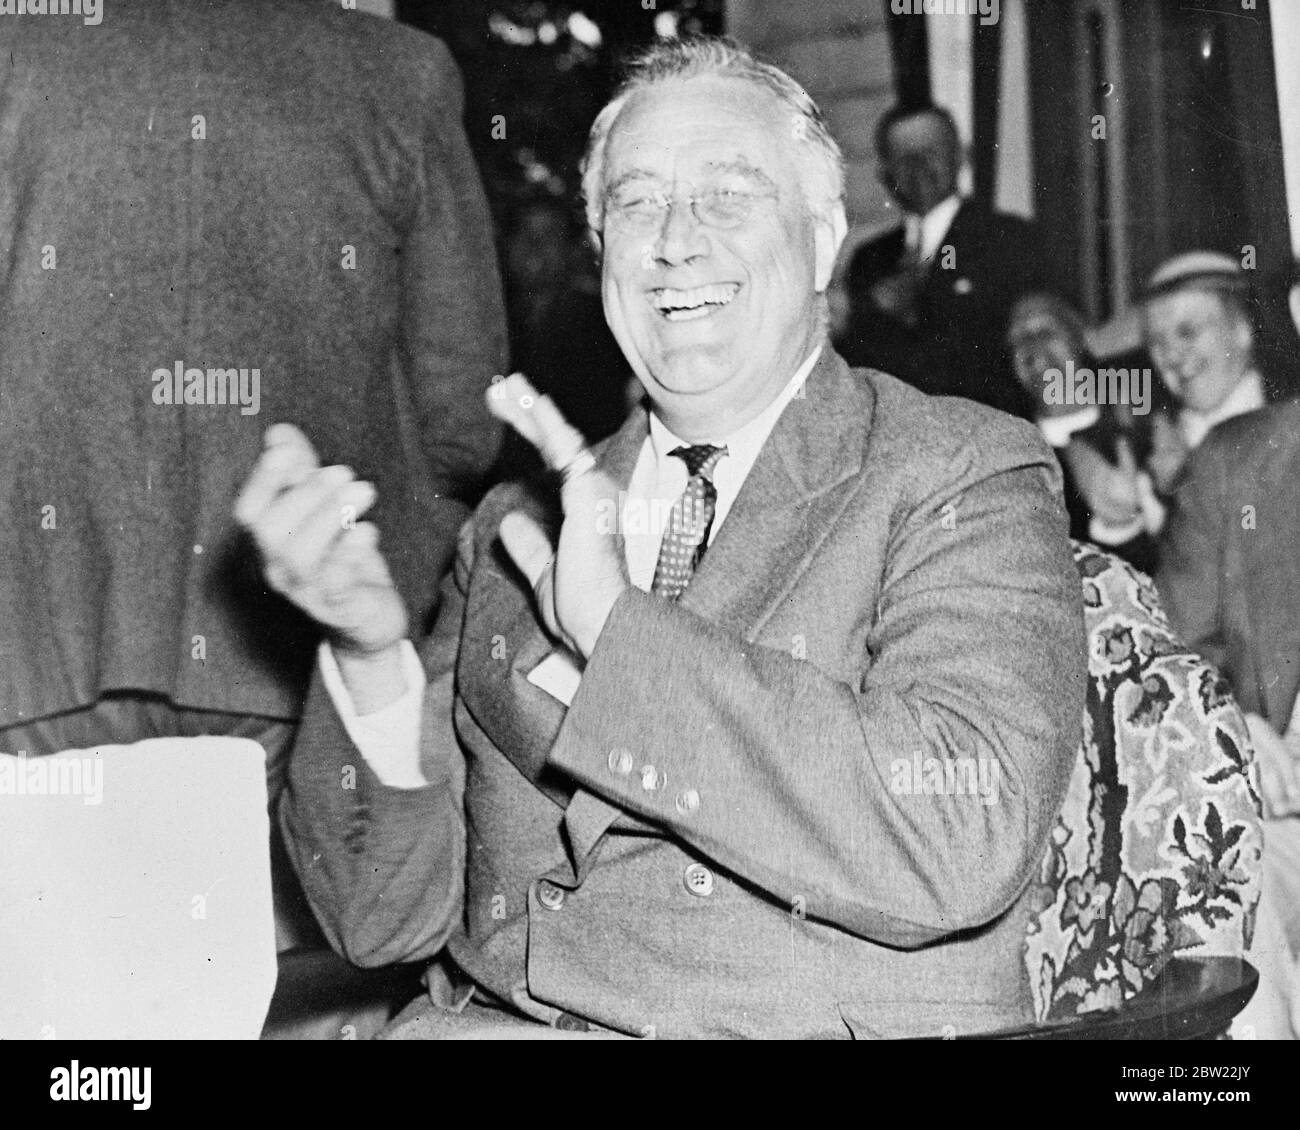 President Franklin Roosevelt, all his Supreme Court and New Deal worries temporarily forgotten, laughs heartily and applauds one of his host's topical observations when visited by Moses Smith, a tenant farmer on his Hyde Park estate, New York, with Bernard Baruch, the financier. 22 September 1937 Stock Photo